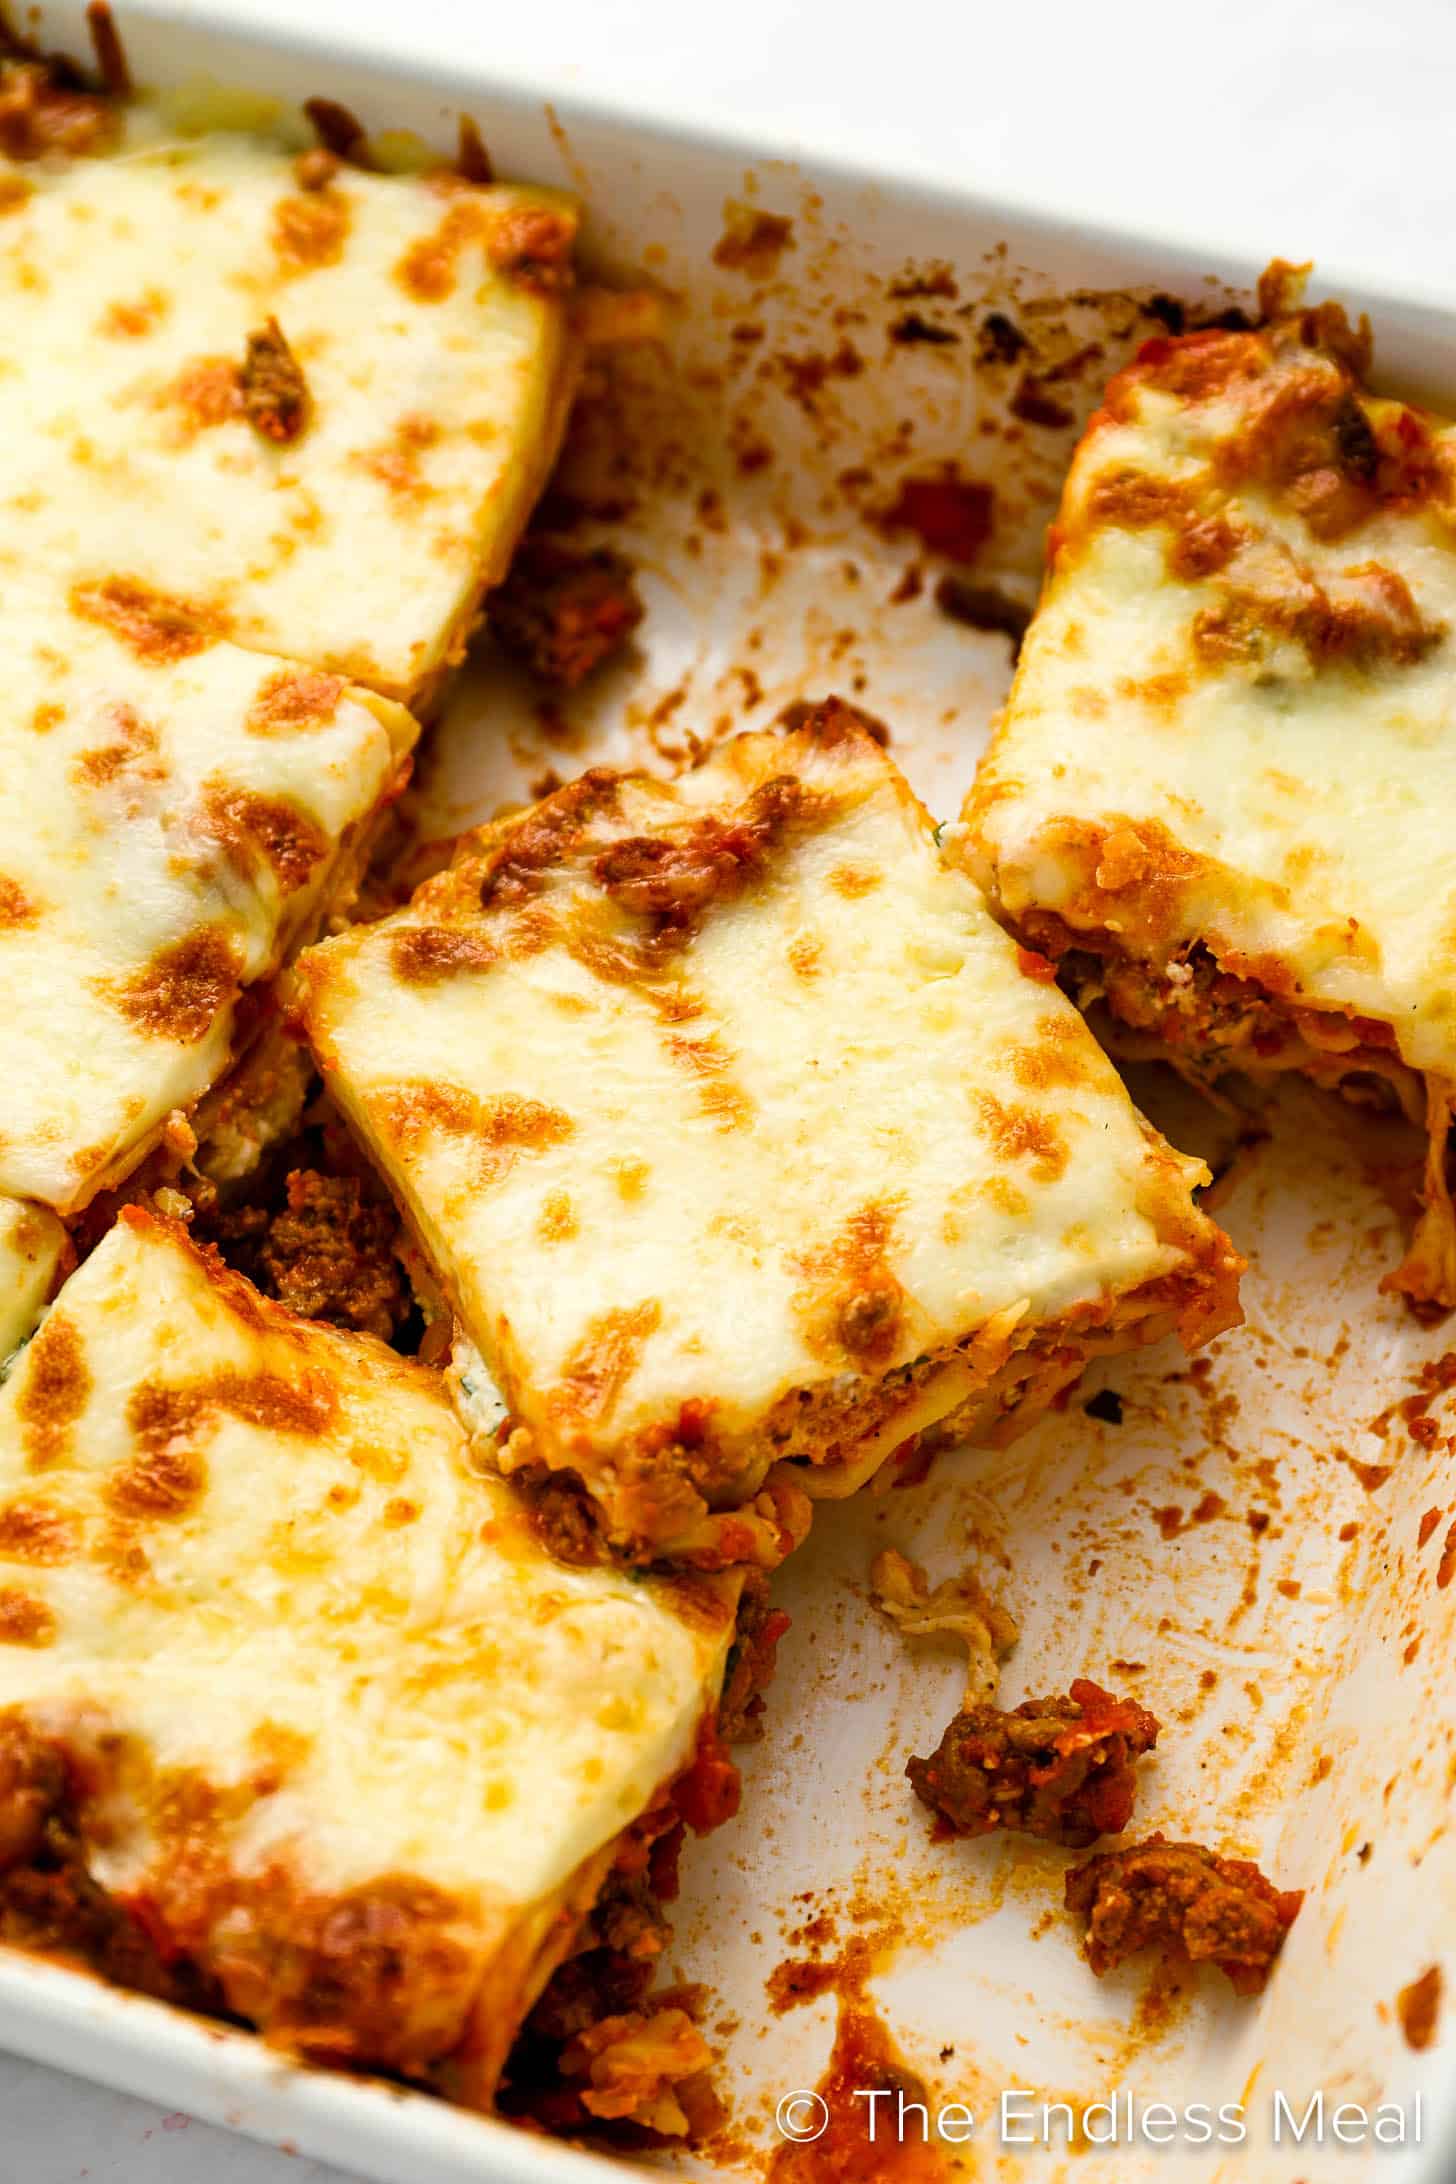 Slices of this Easy Lasagna Recipe in a a baking dish